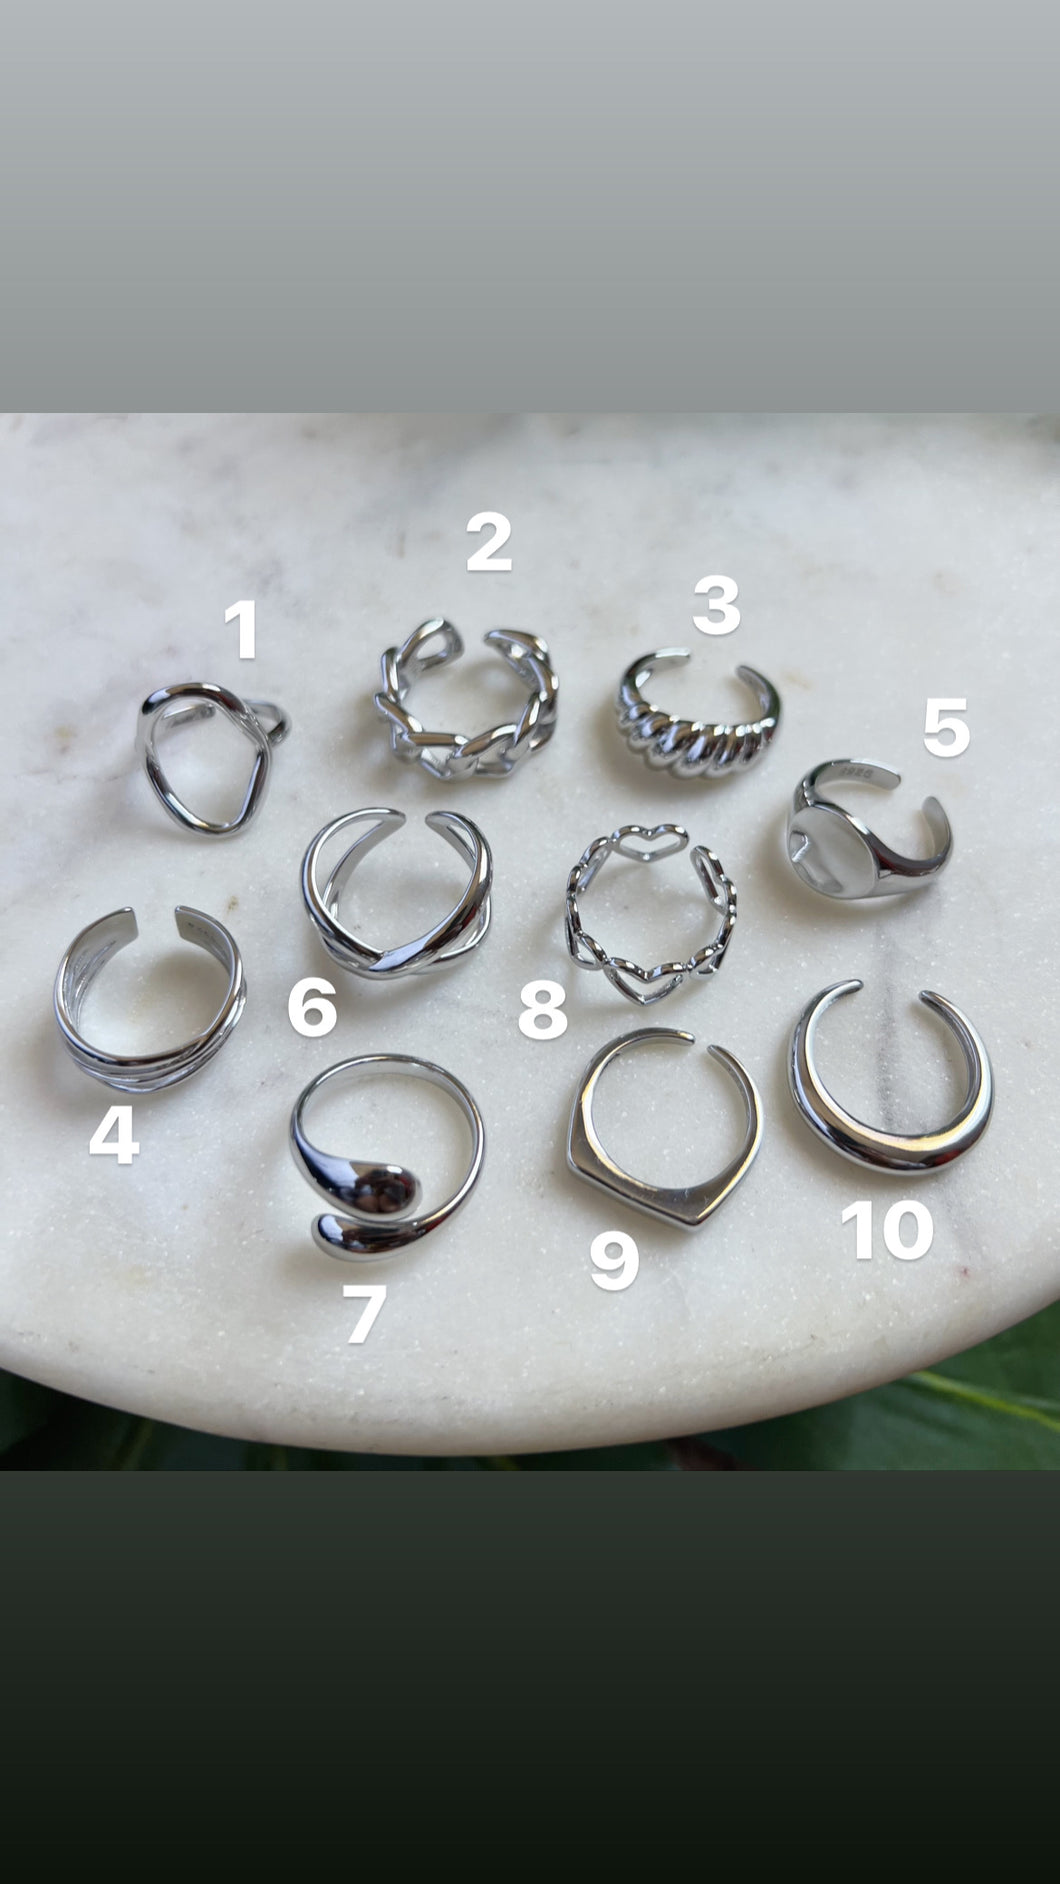 Plain Wide Band 925 Sterling Silver Ring Chunky Womens Jewelry Size 5 -10 |  eBay | Silver rings with stones, Boho rings bohemian style, Chunky silver  rings